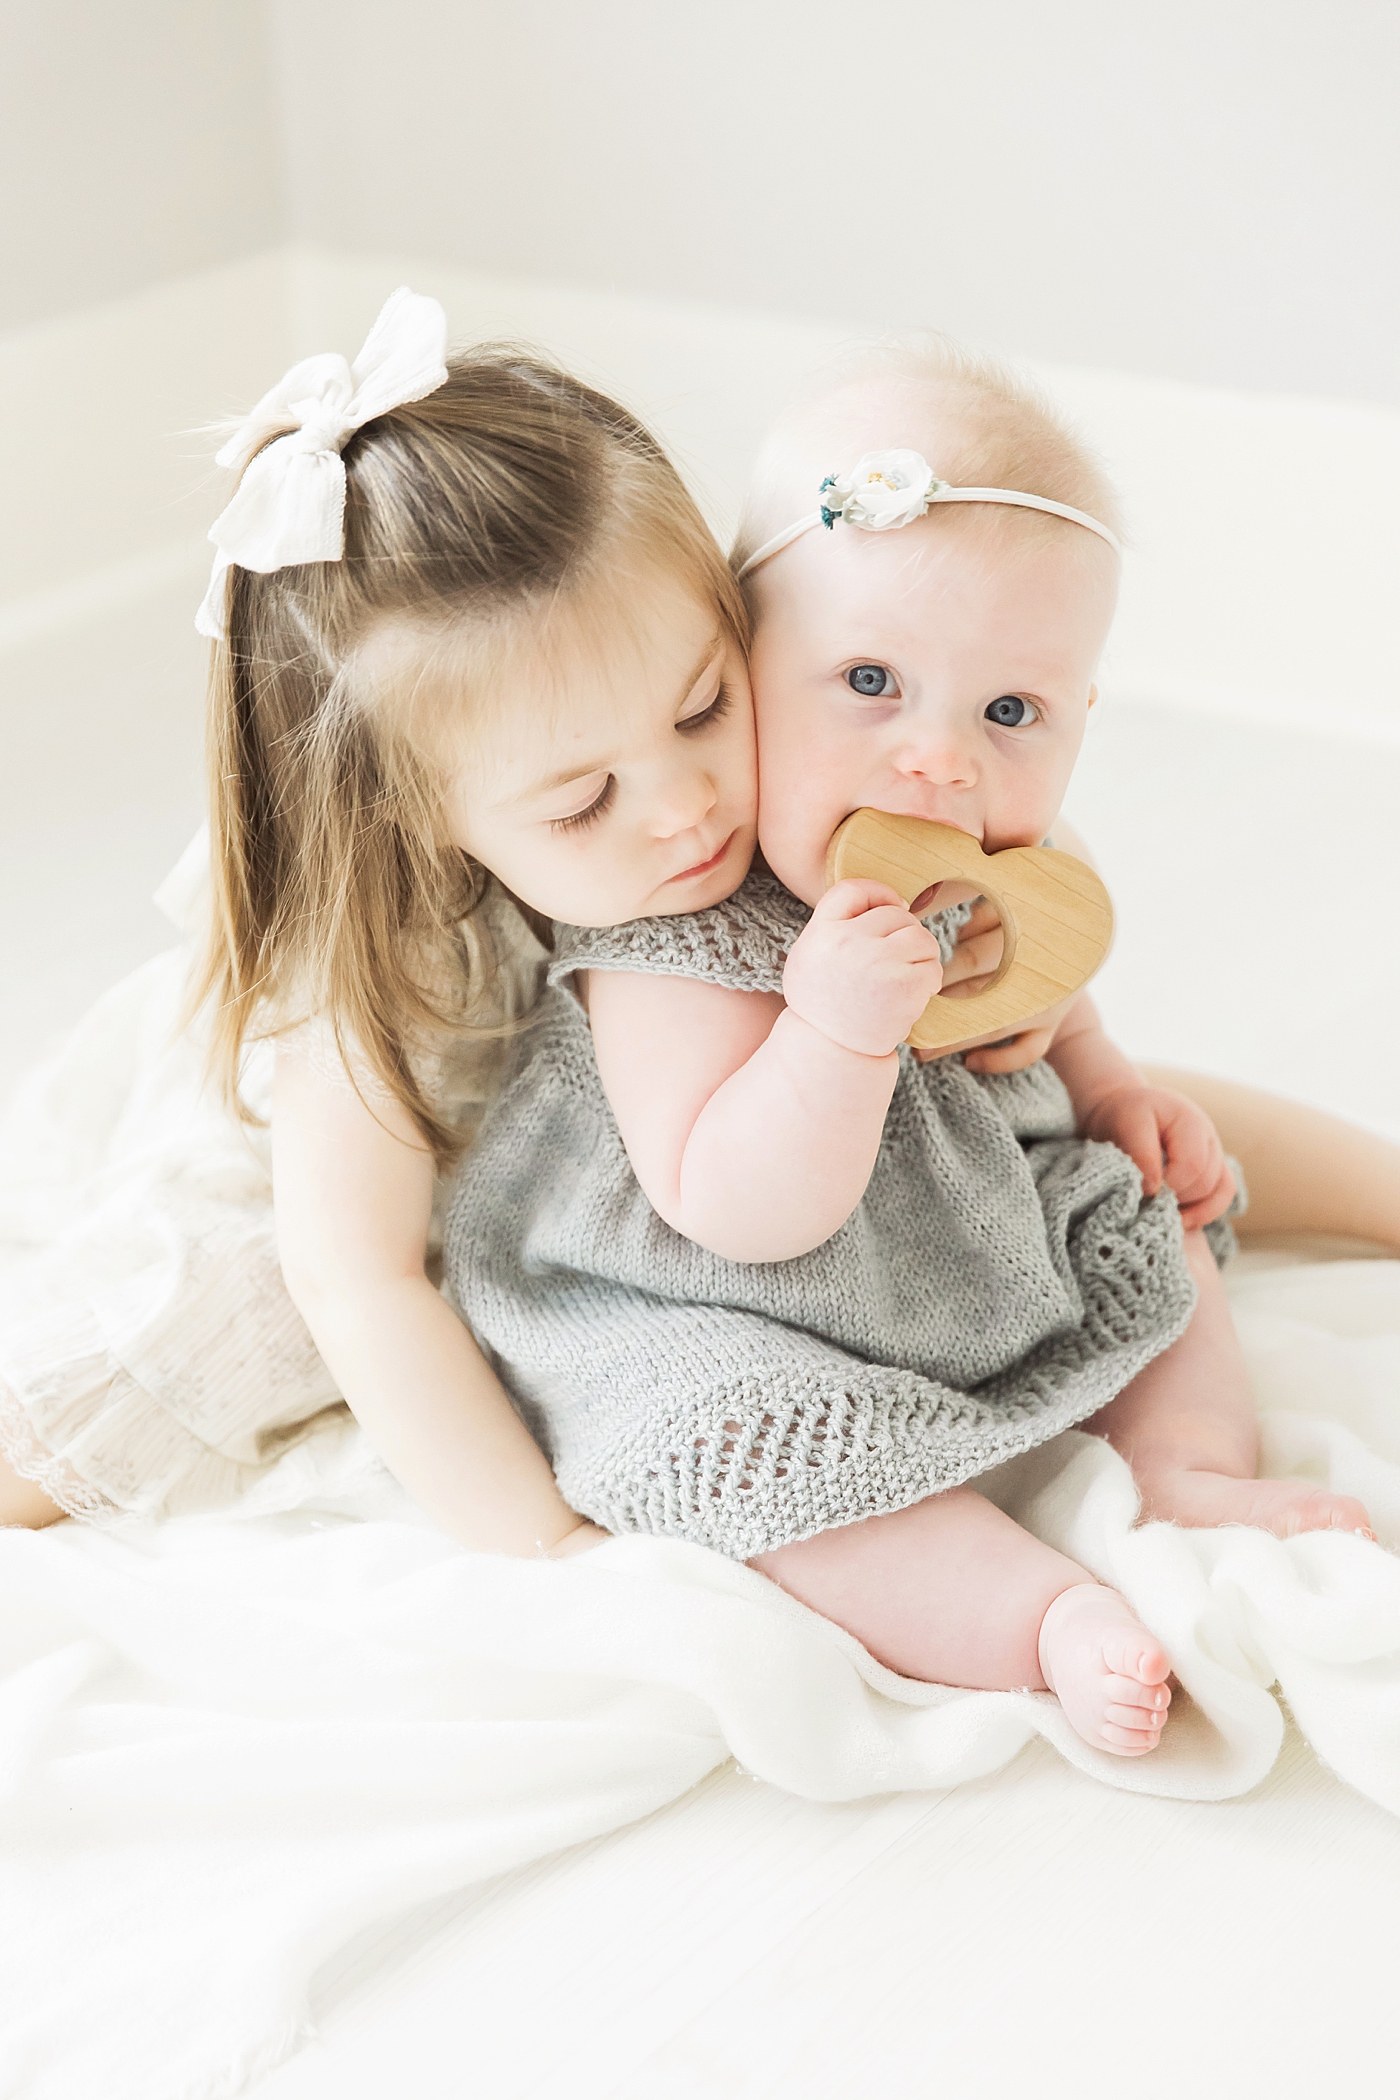 Big sister giving her baby sister a hug. Such a sweet moment photographed by Fresh Light Photography.